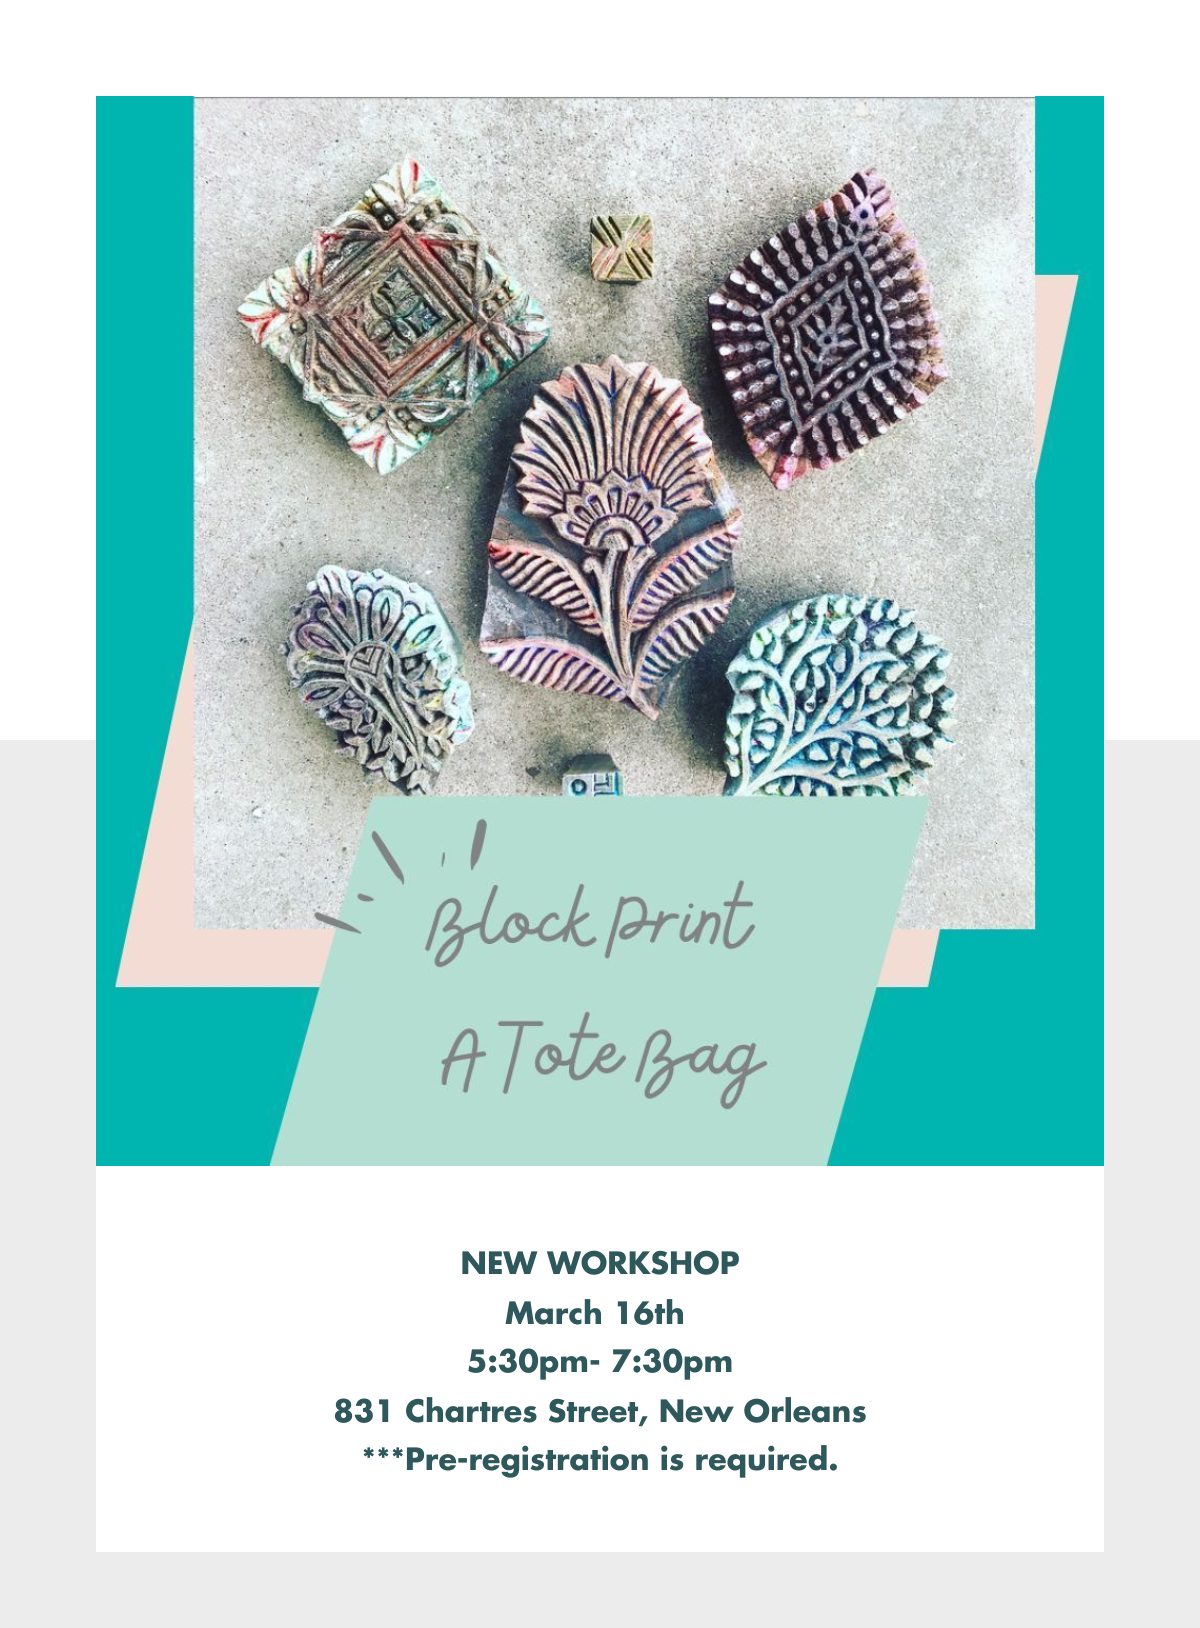 Workshop, Get Crafty with Passion Lilie on March 16th